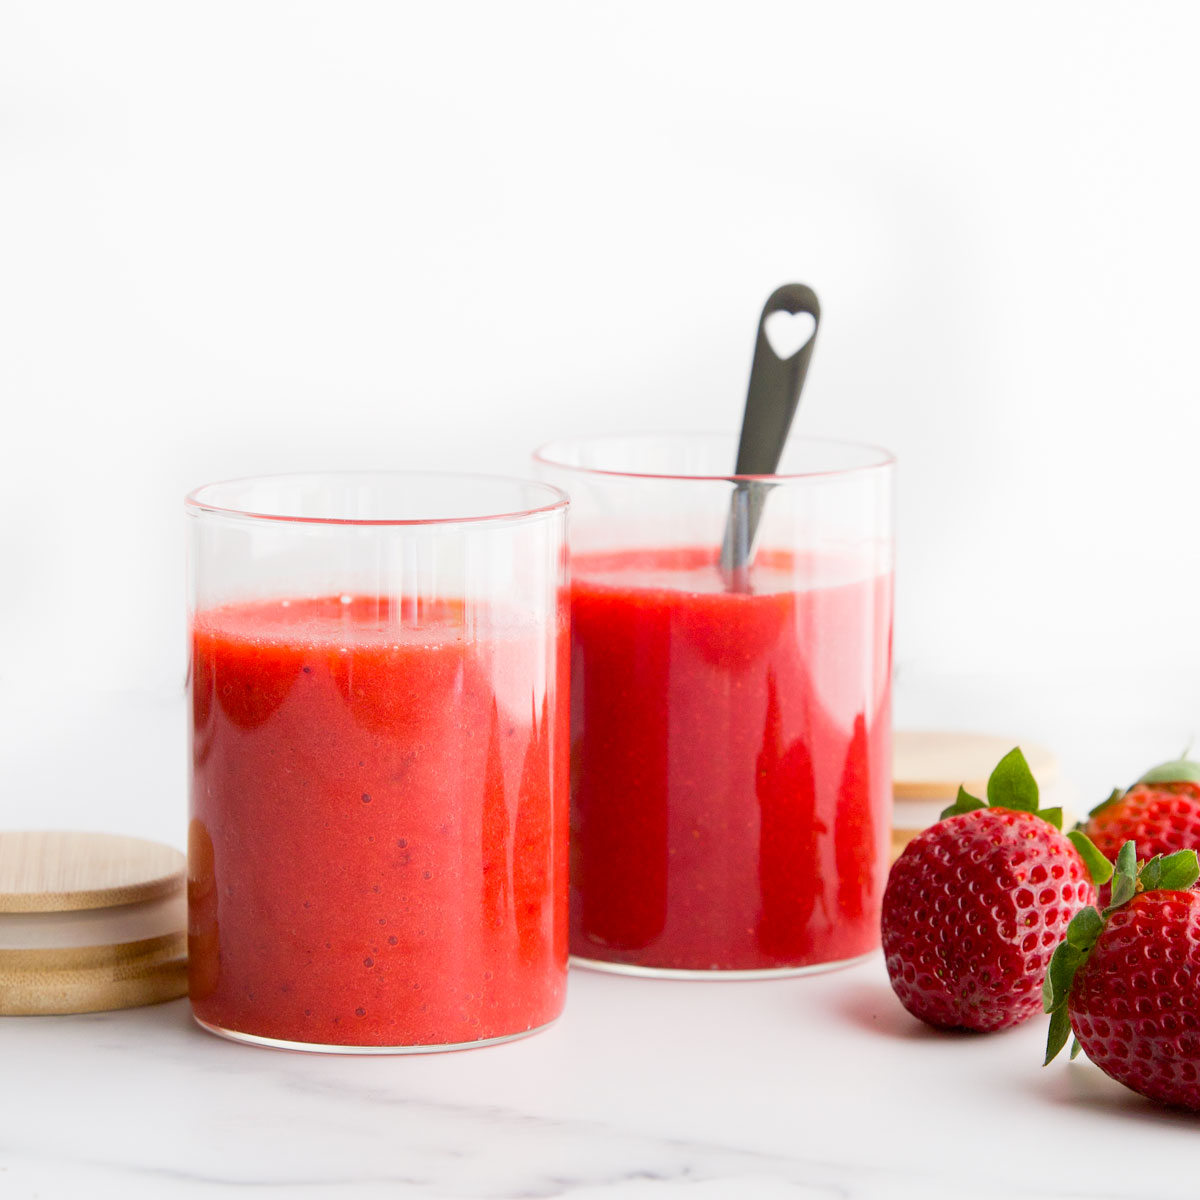 Strawberry Puree in 2 Glass Jars with Strawberries Scattered to the Side. 